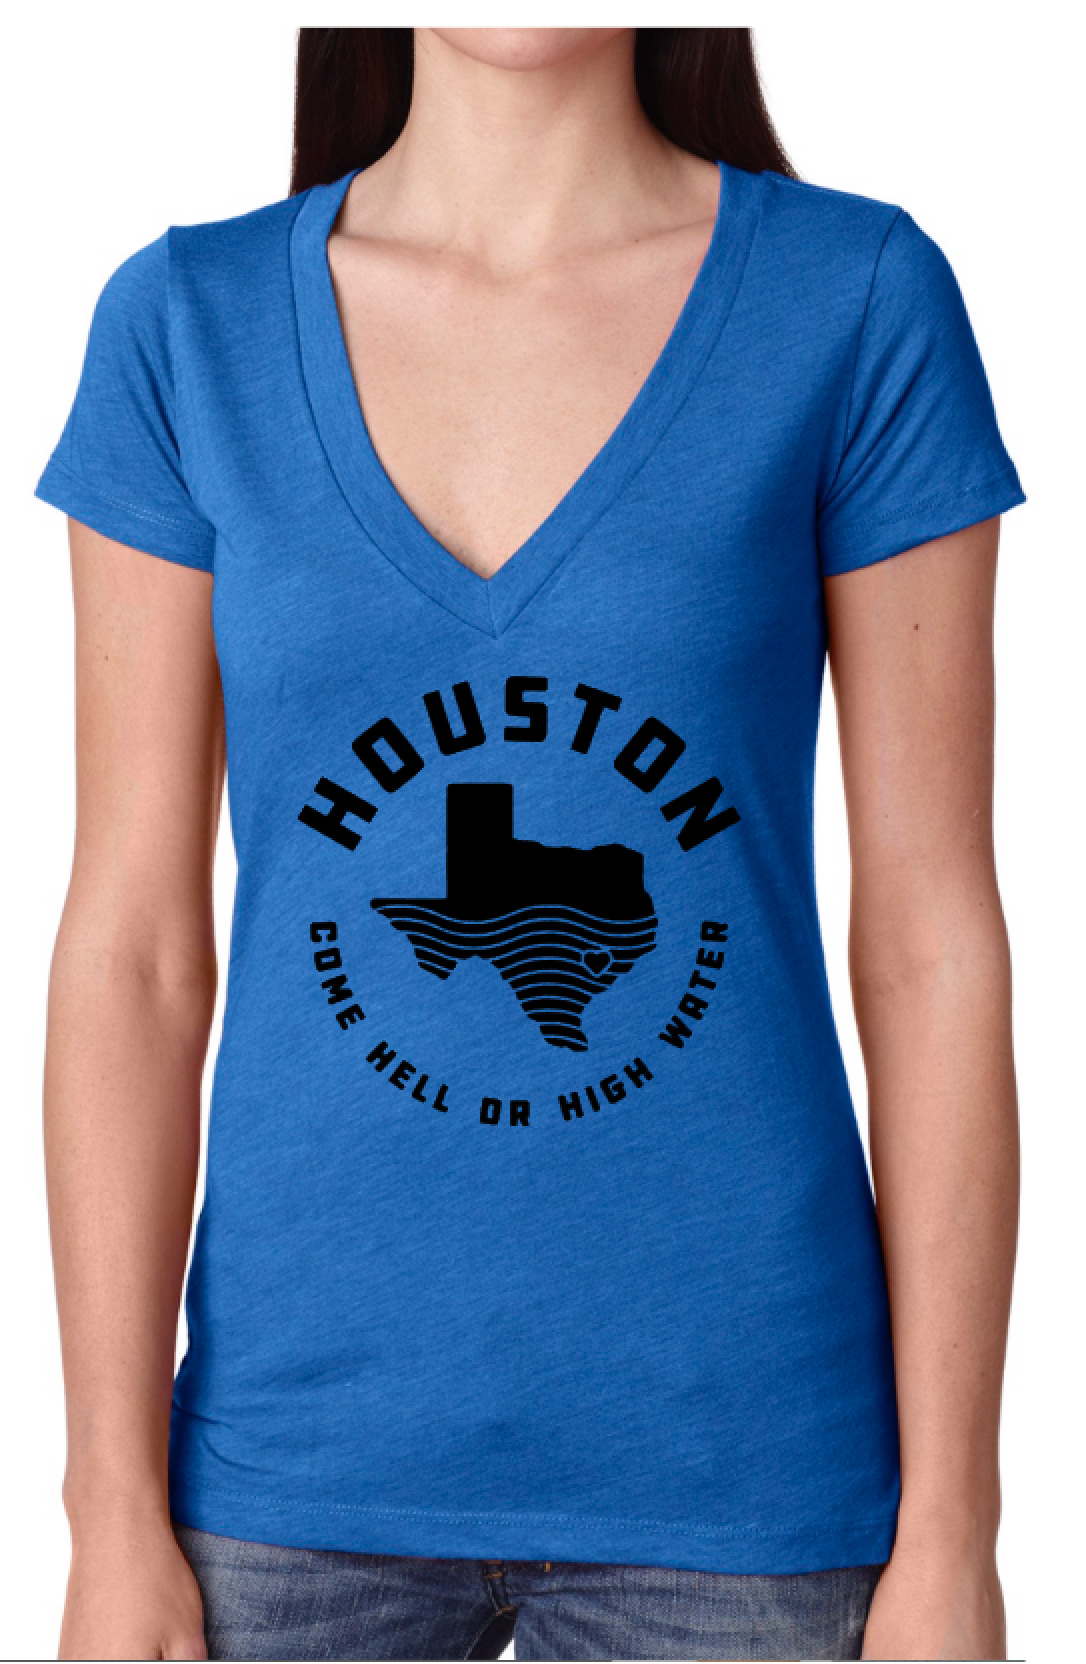 Houston - Come Hell or High Water; Printed Shirt; Ladies Cut or Unisex Cut